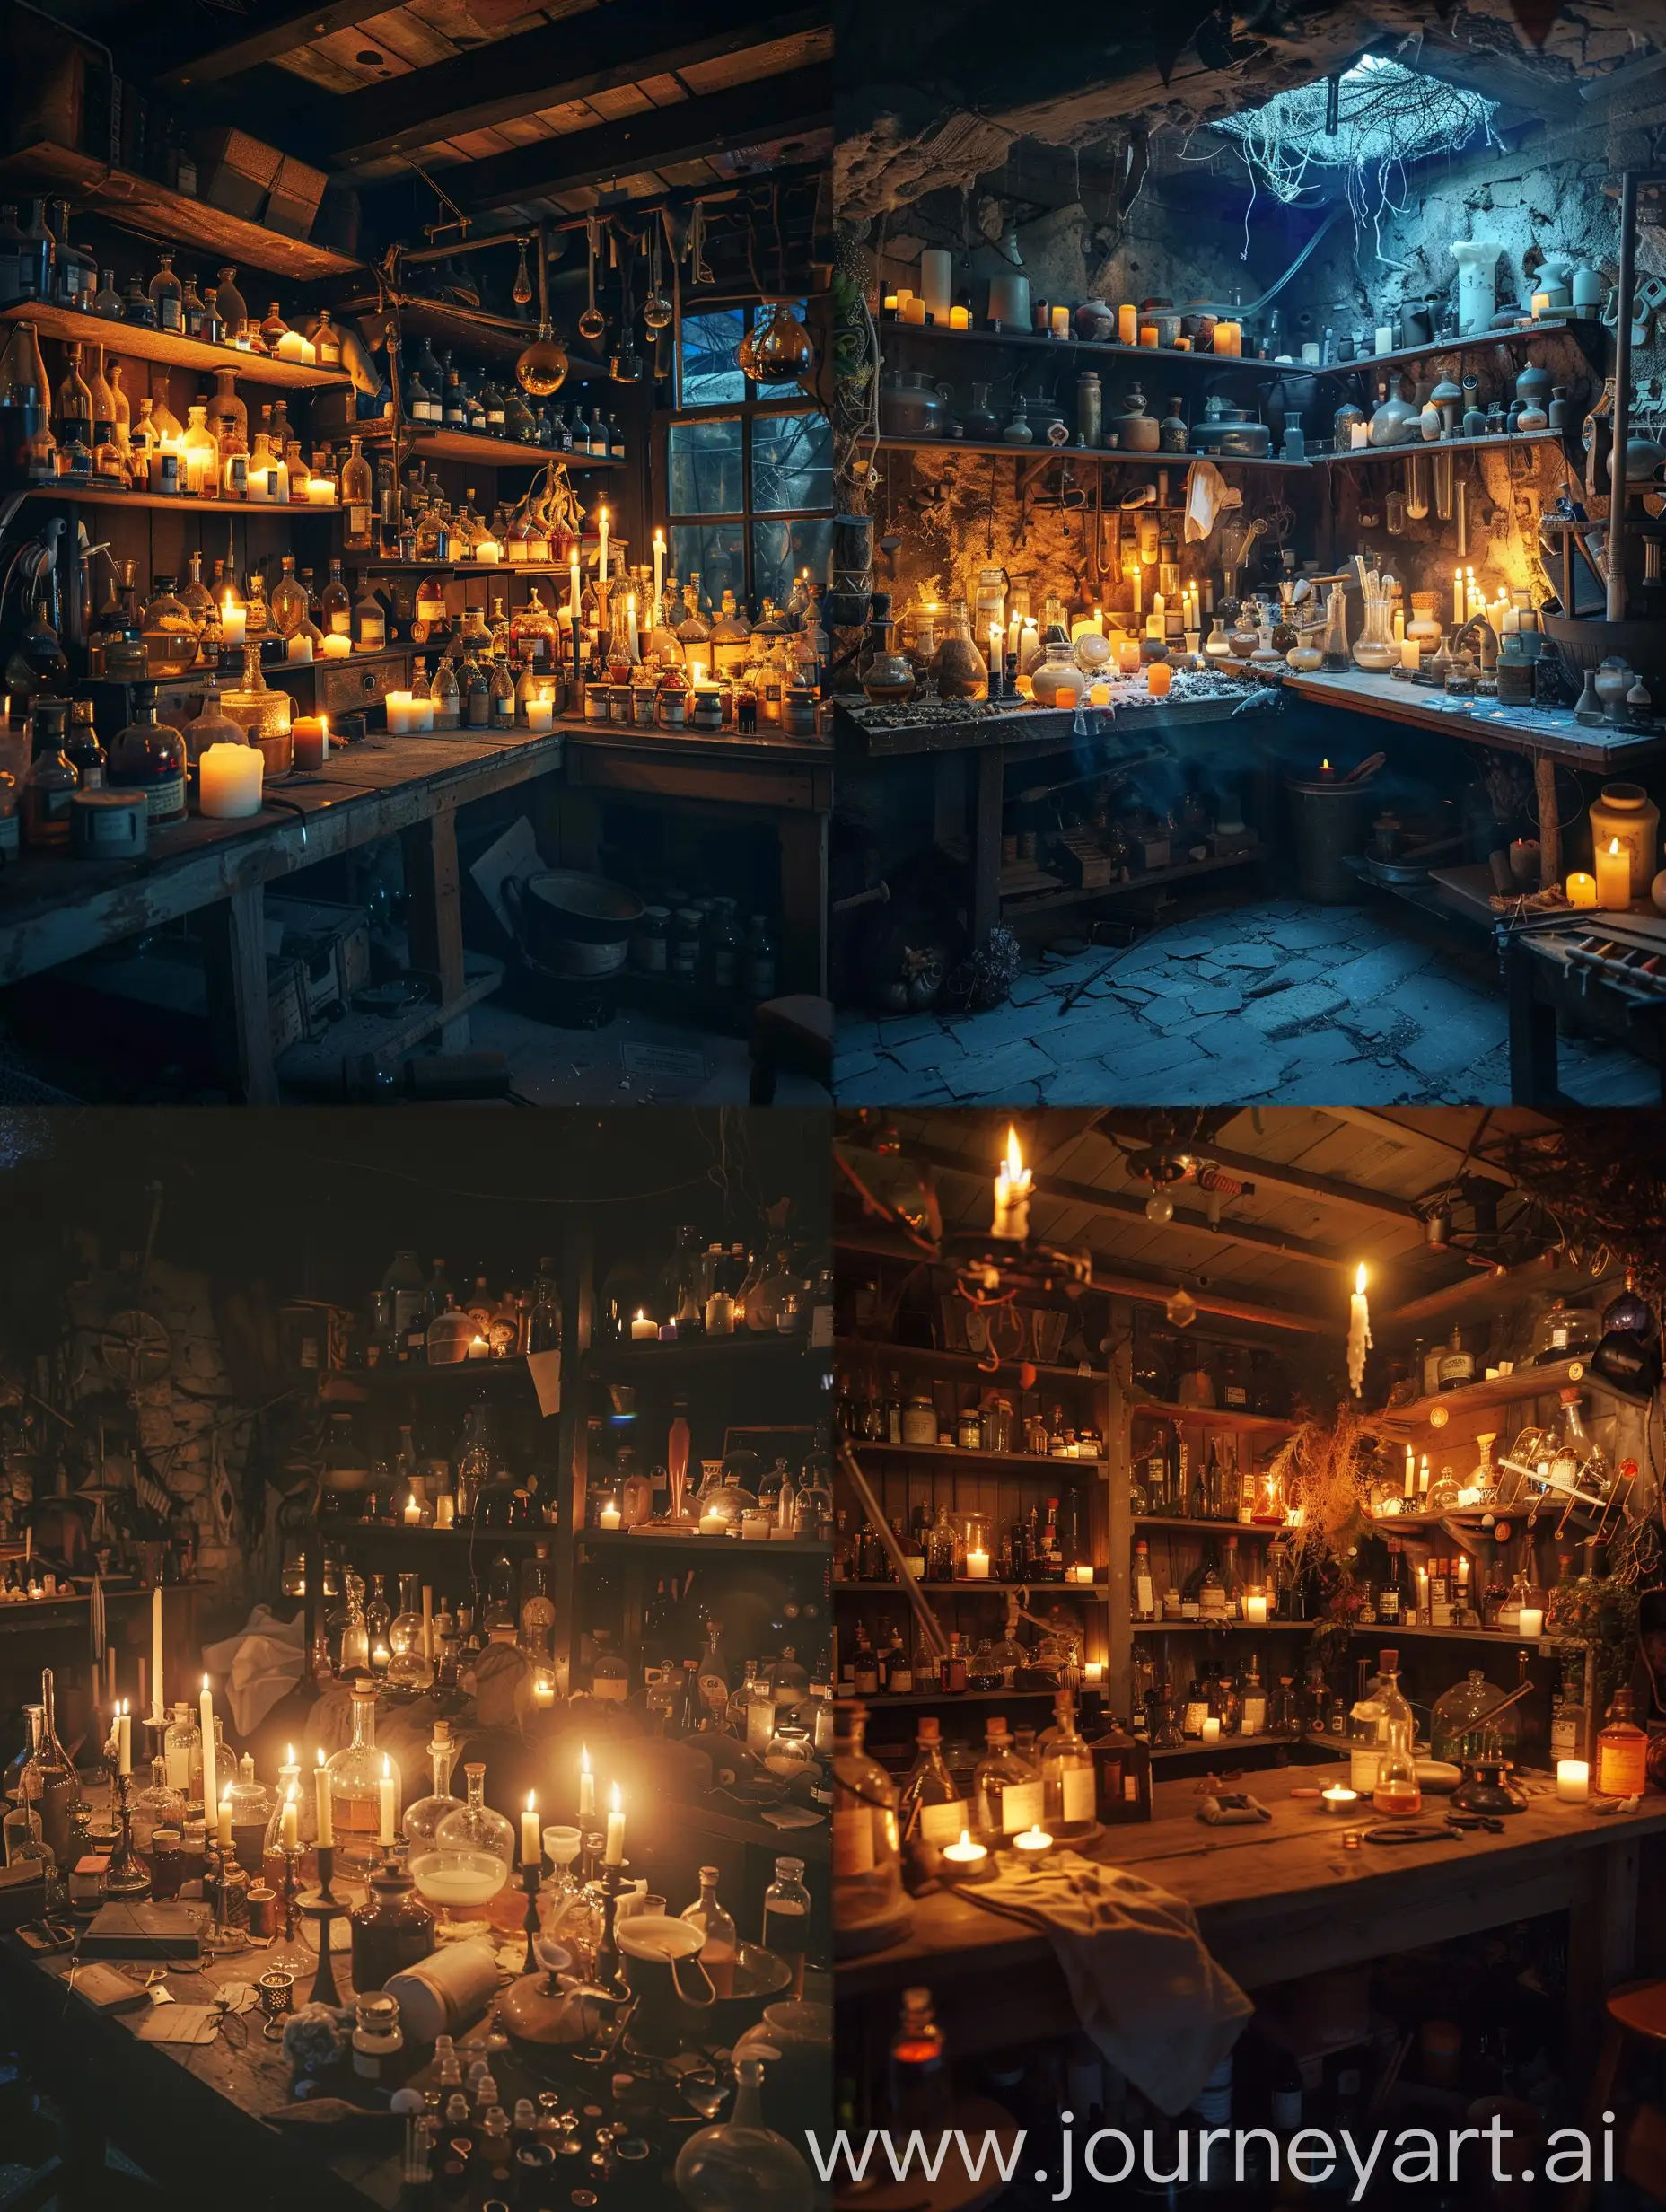 Cluttered alchemy laboratory at night illuminated by candles